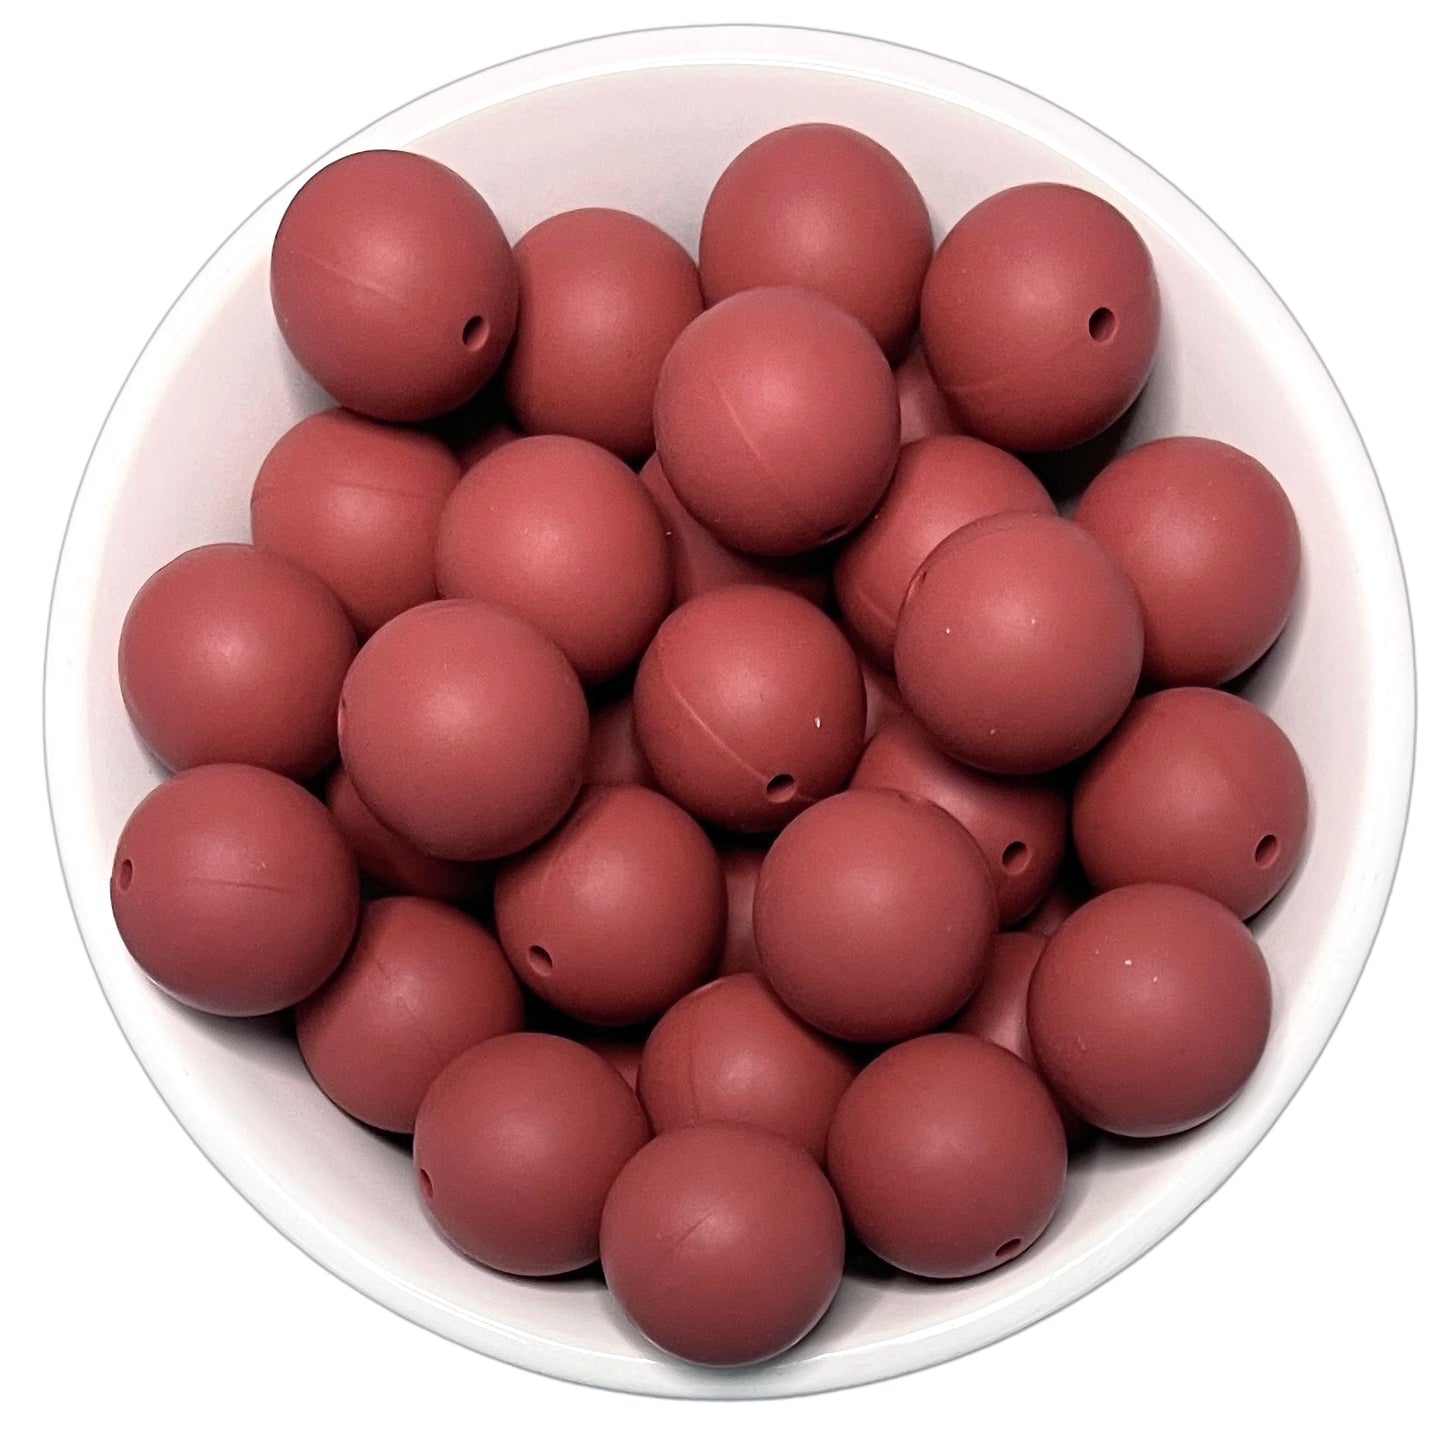 Berry Burgundy 19mm Silicone Beads - 5 pk.